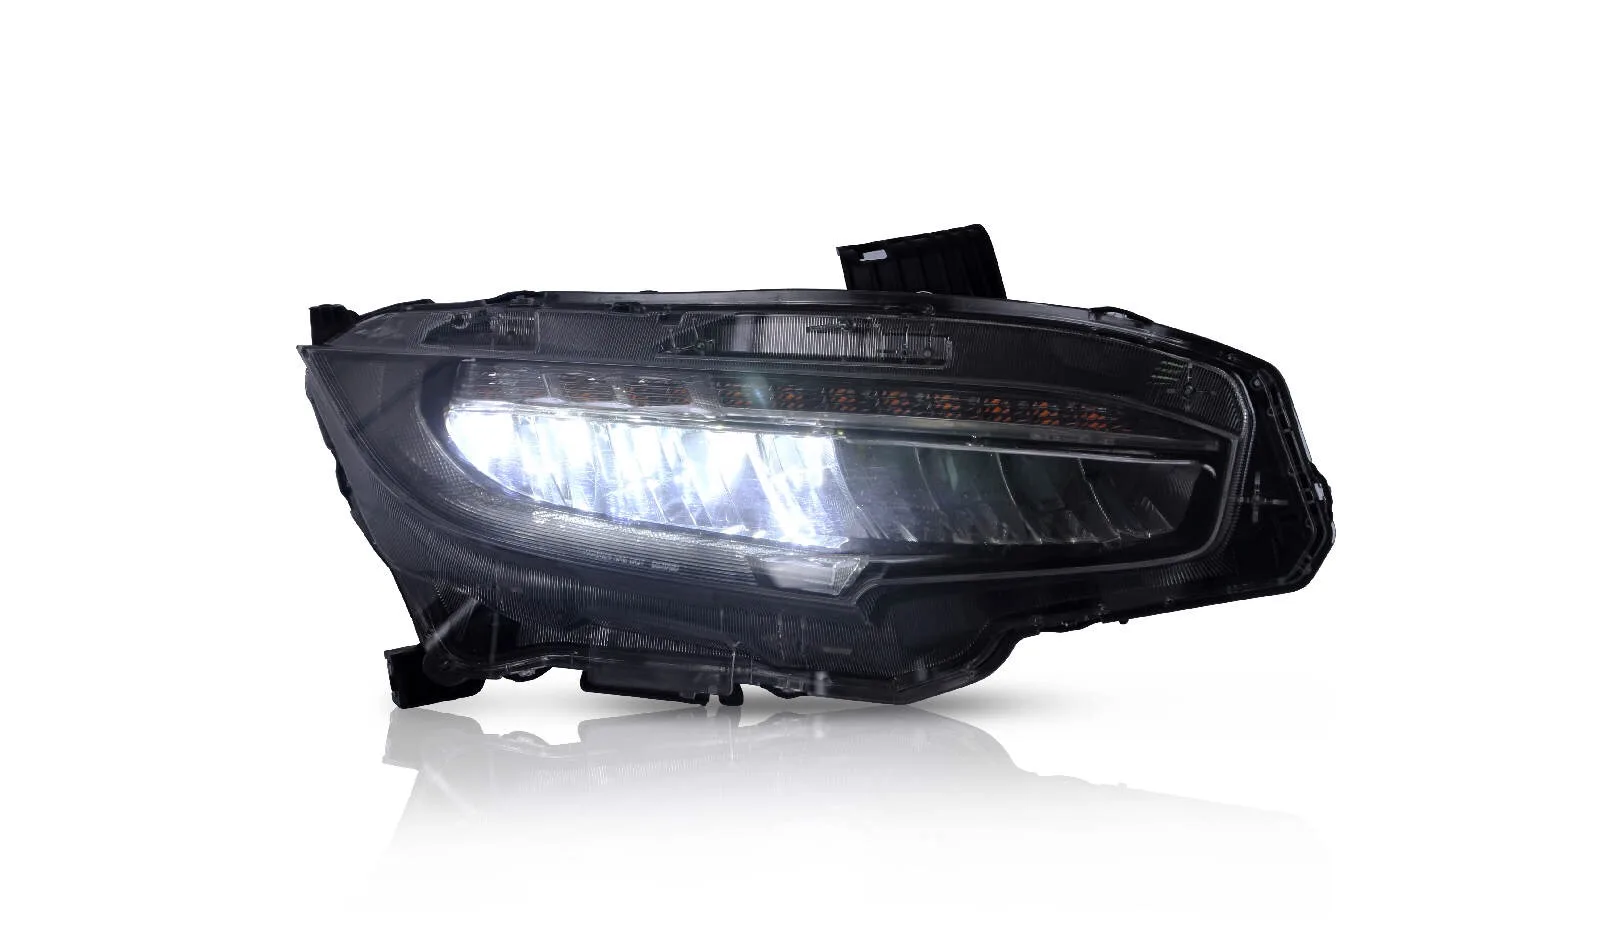 VLAND manufacturer for car headlight for Civic head light 2016 2017 2018 LED head lamp with moving signal & color-changing DRL